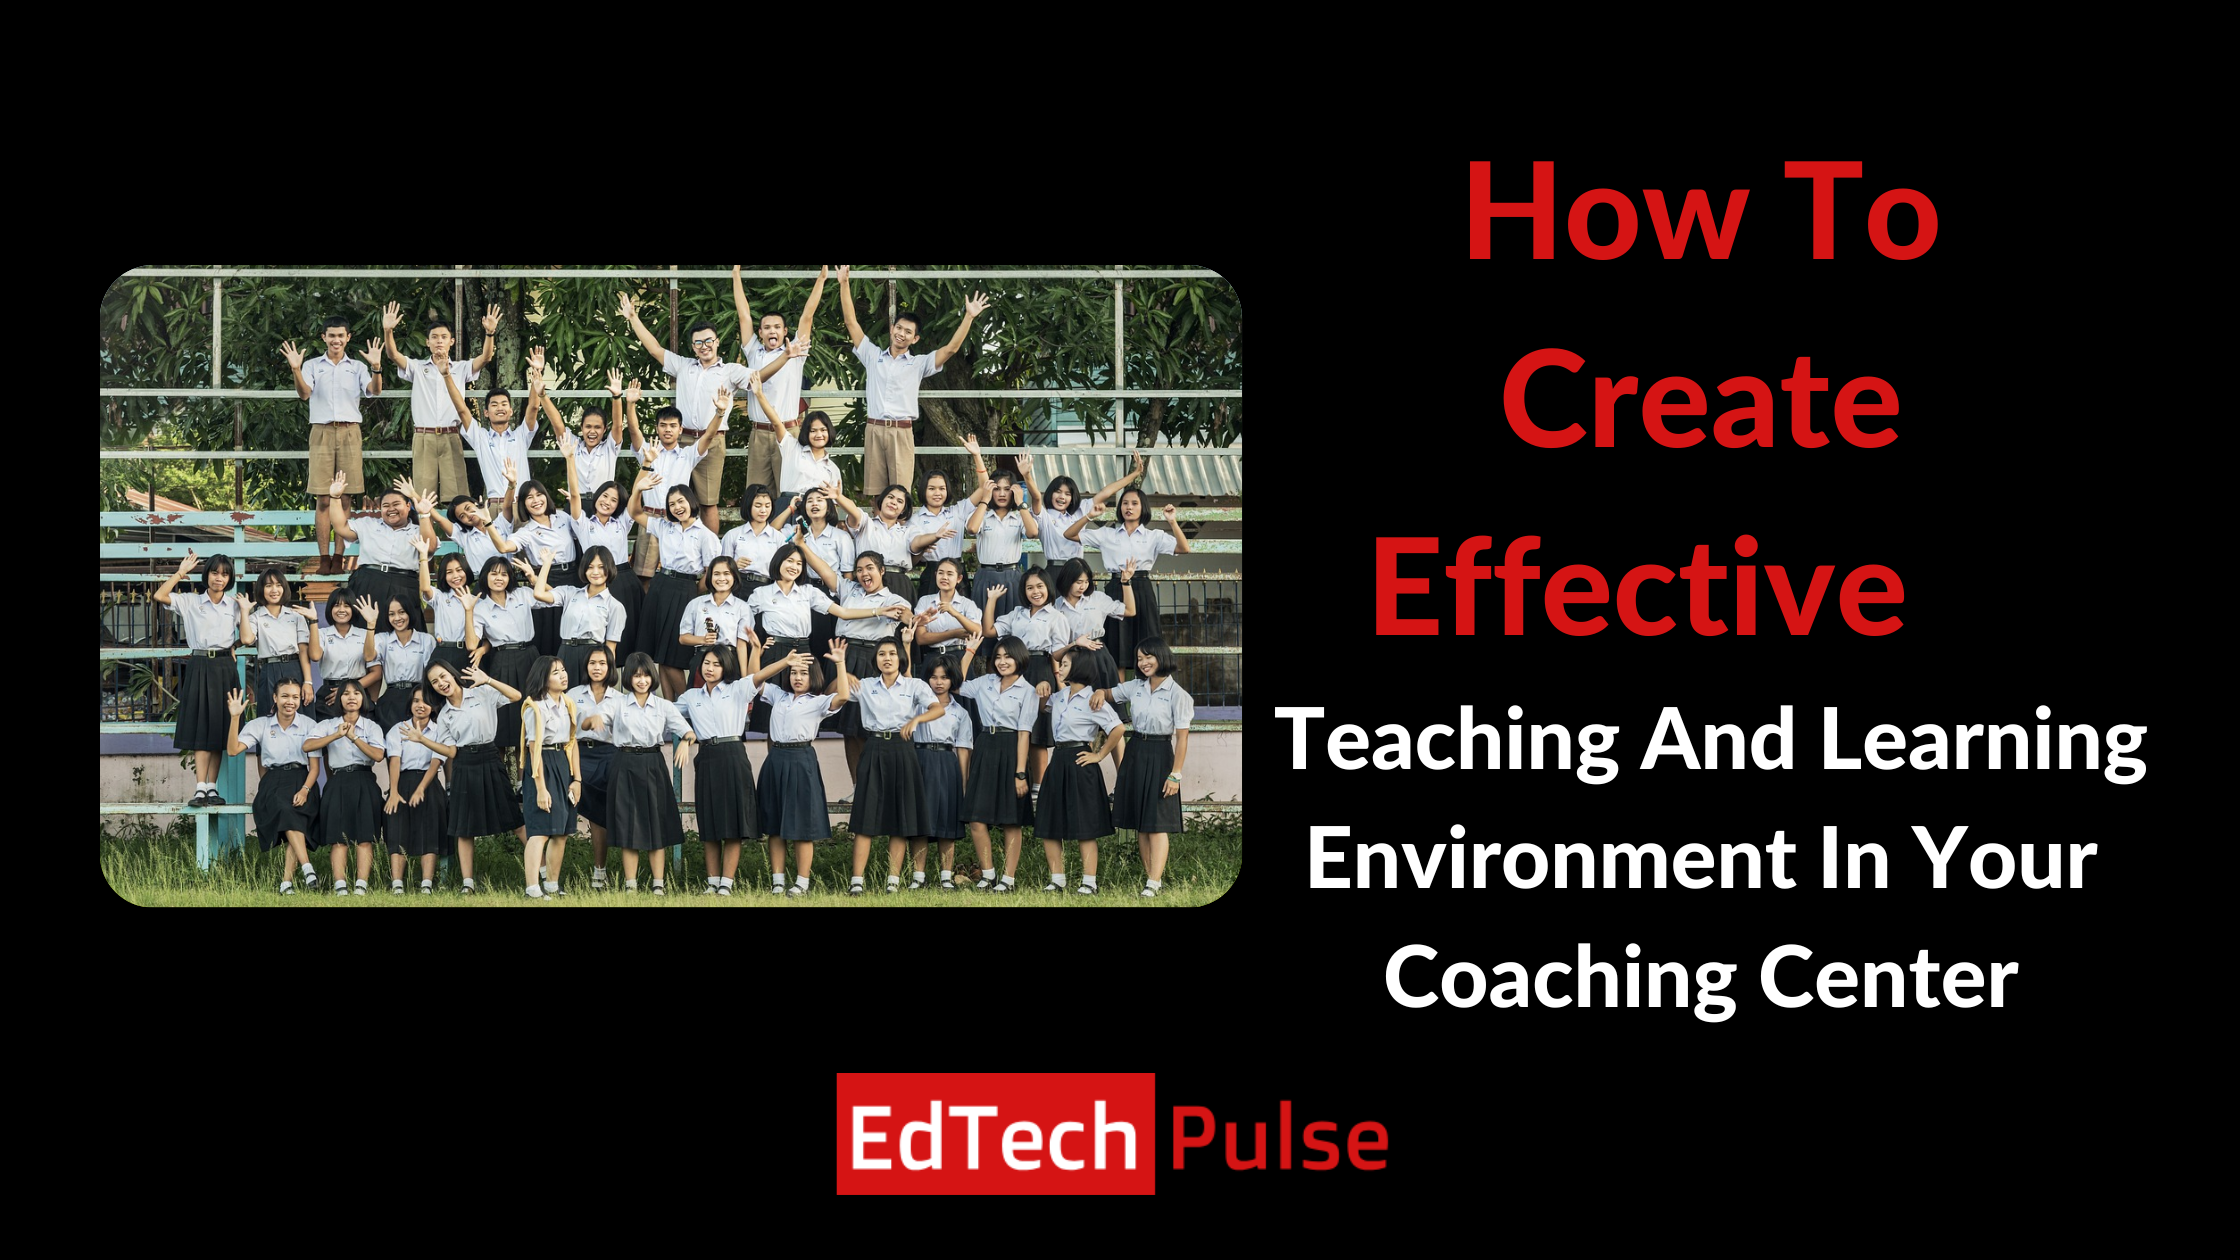 How To Create Effective Teaching And Learning Environment In Your Coaching Center